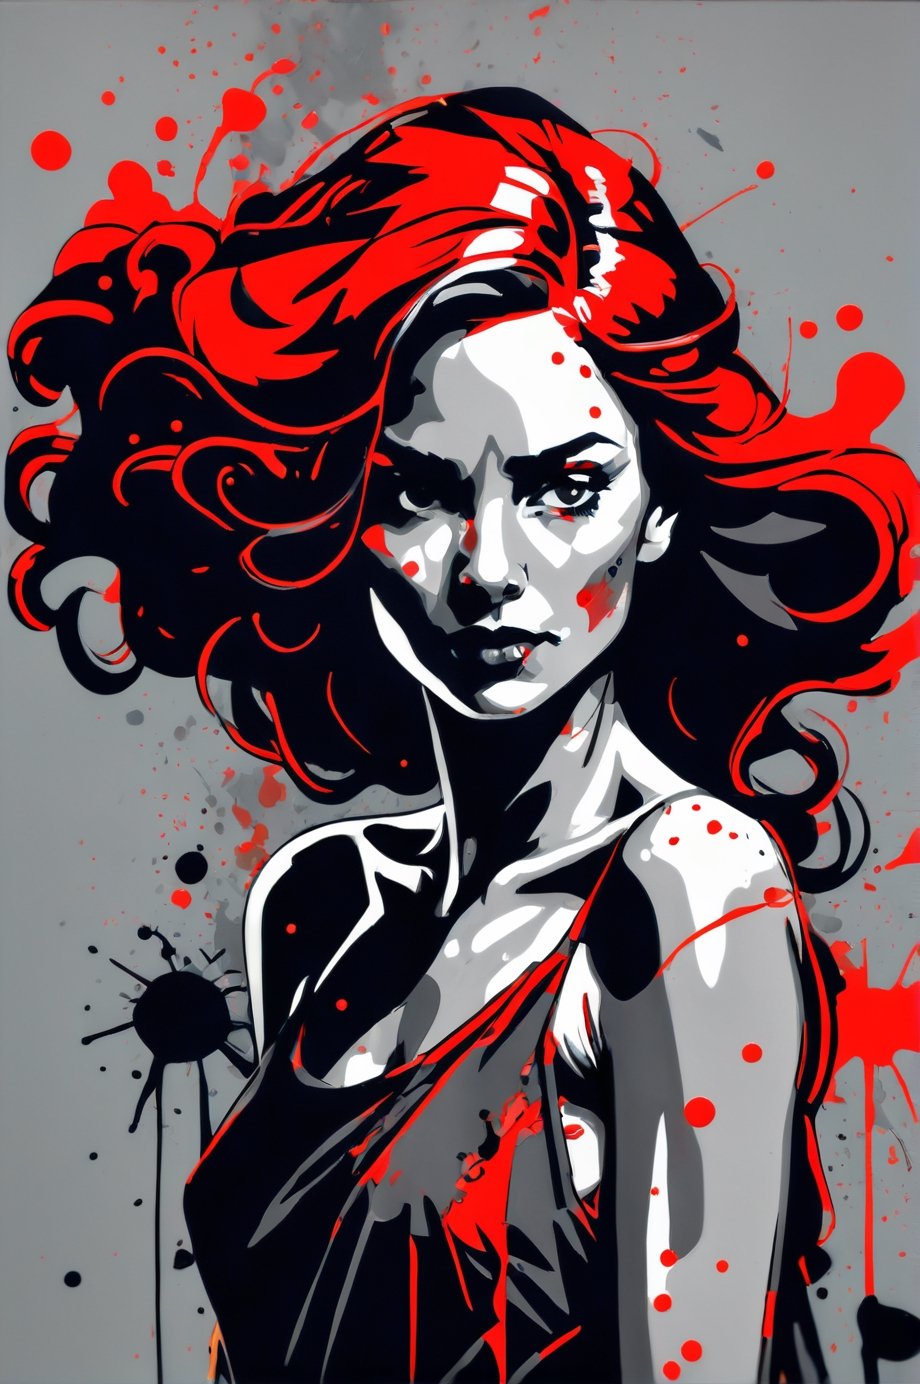 An artistic portrait of a woman with a dark grayscale color palette, accented with selective splashes of red. The woman has a flowing dress and has a relaxed posture with her head tilted upwards. {randomly selected artist). The red accents should have a chaotic, splattered effect, suggesting motion and emotion. 